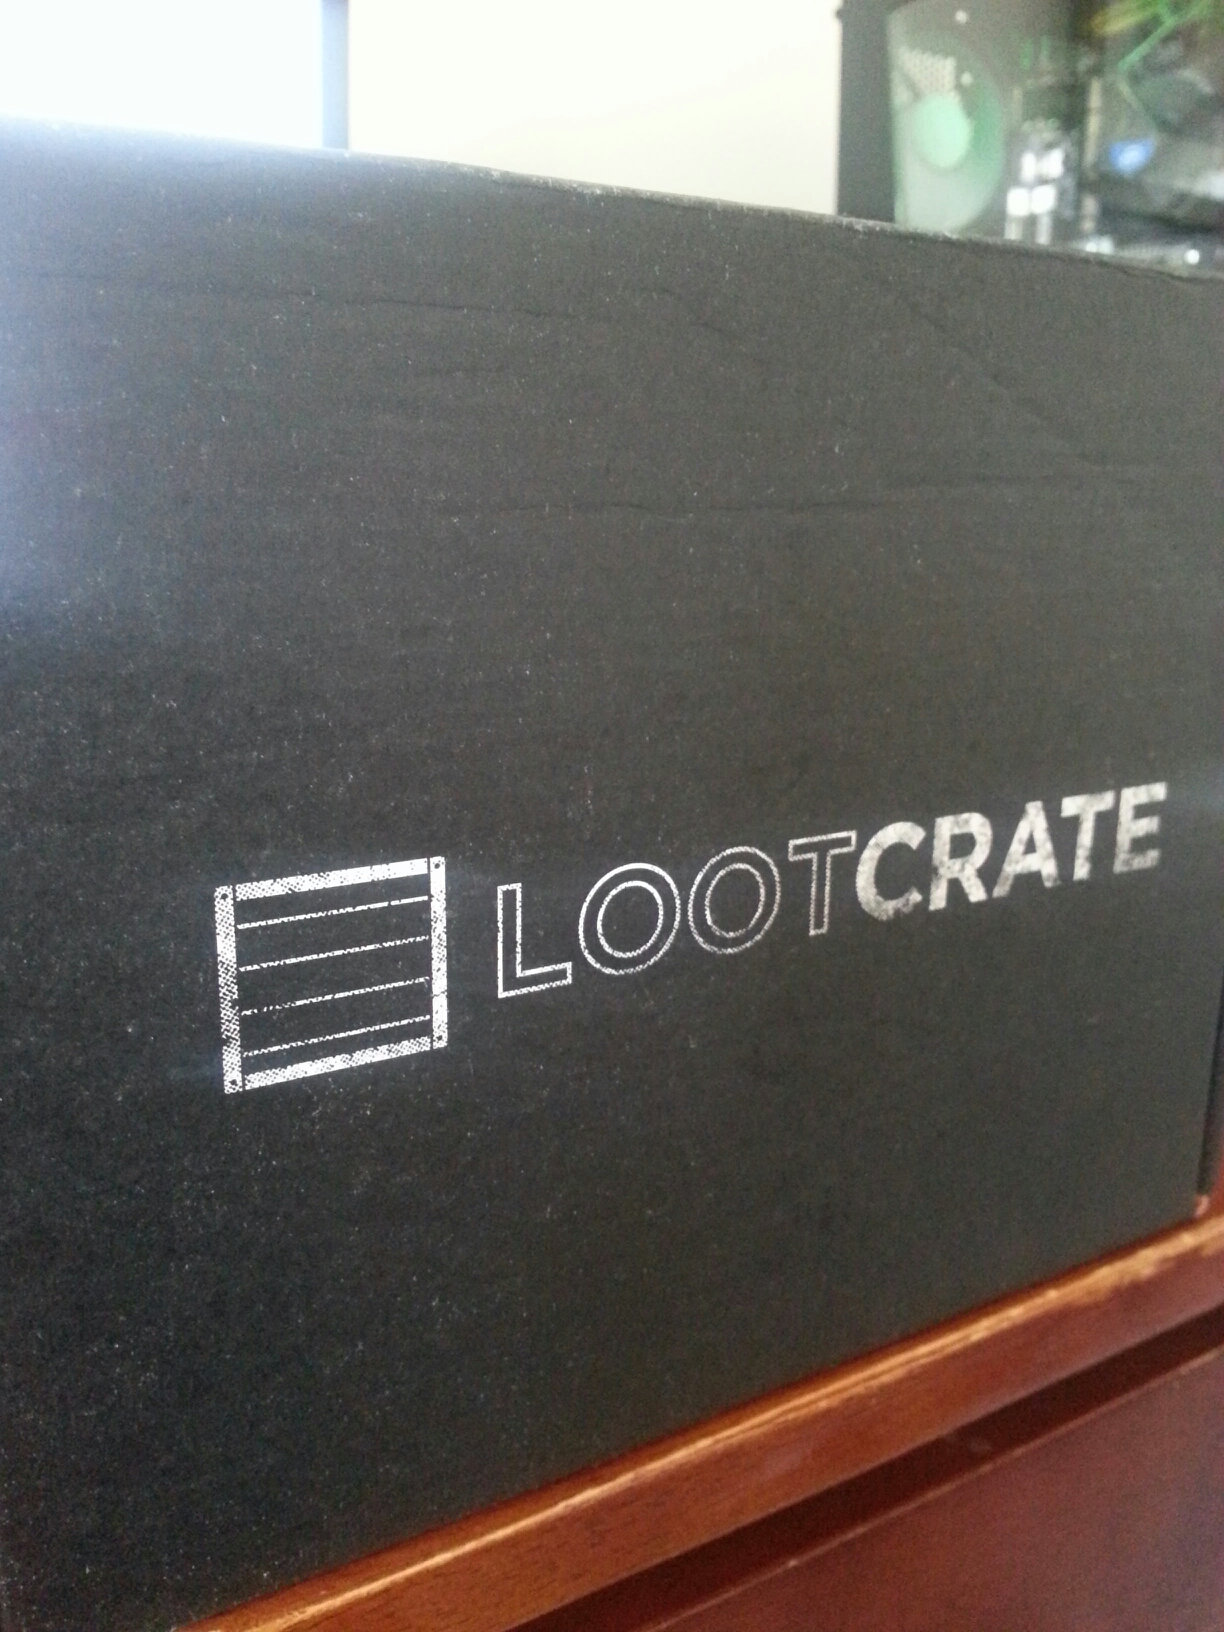 Loot crate march 2014 subscription unboxing